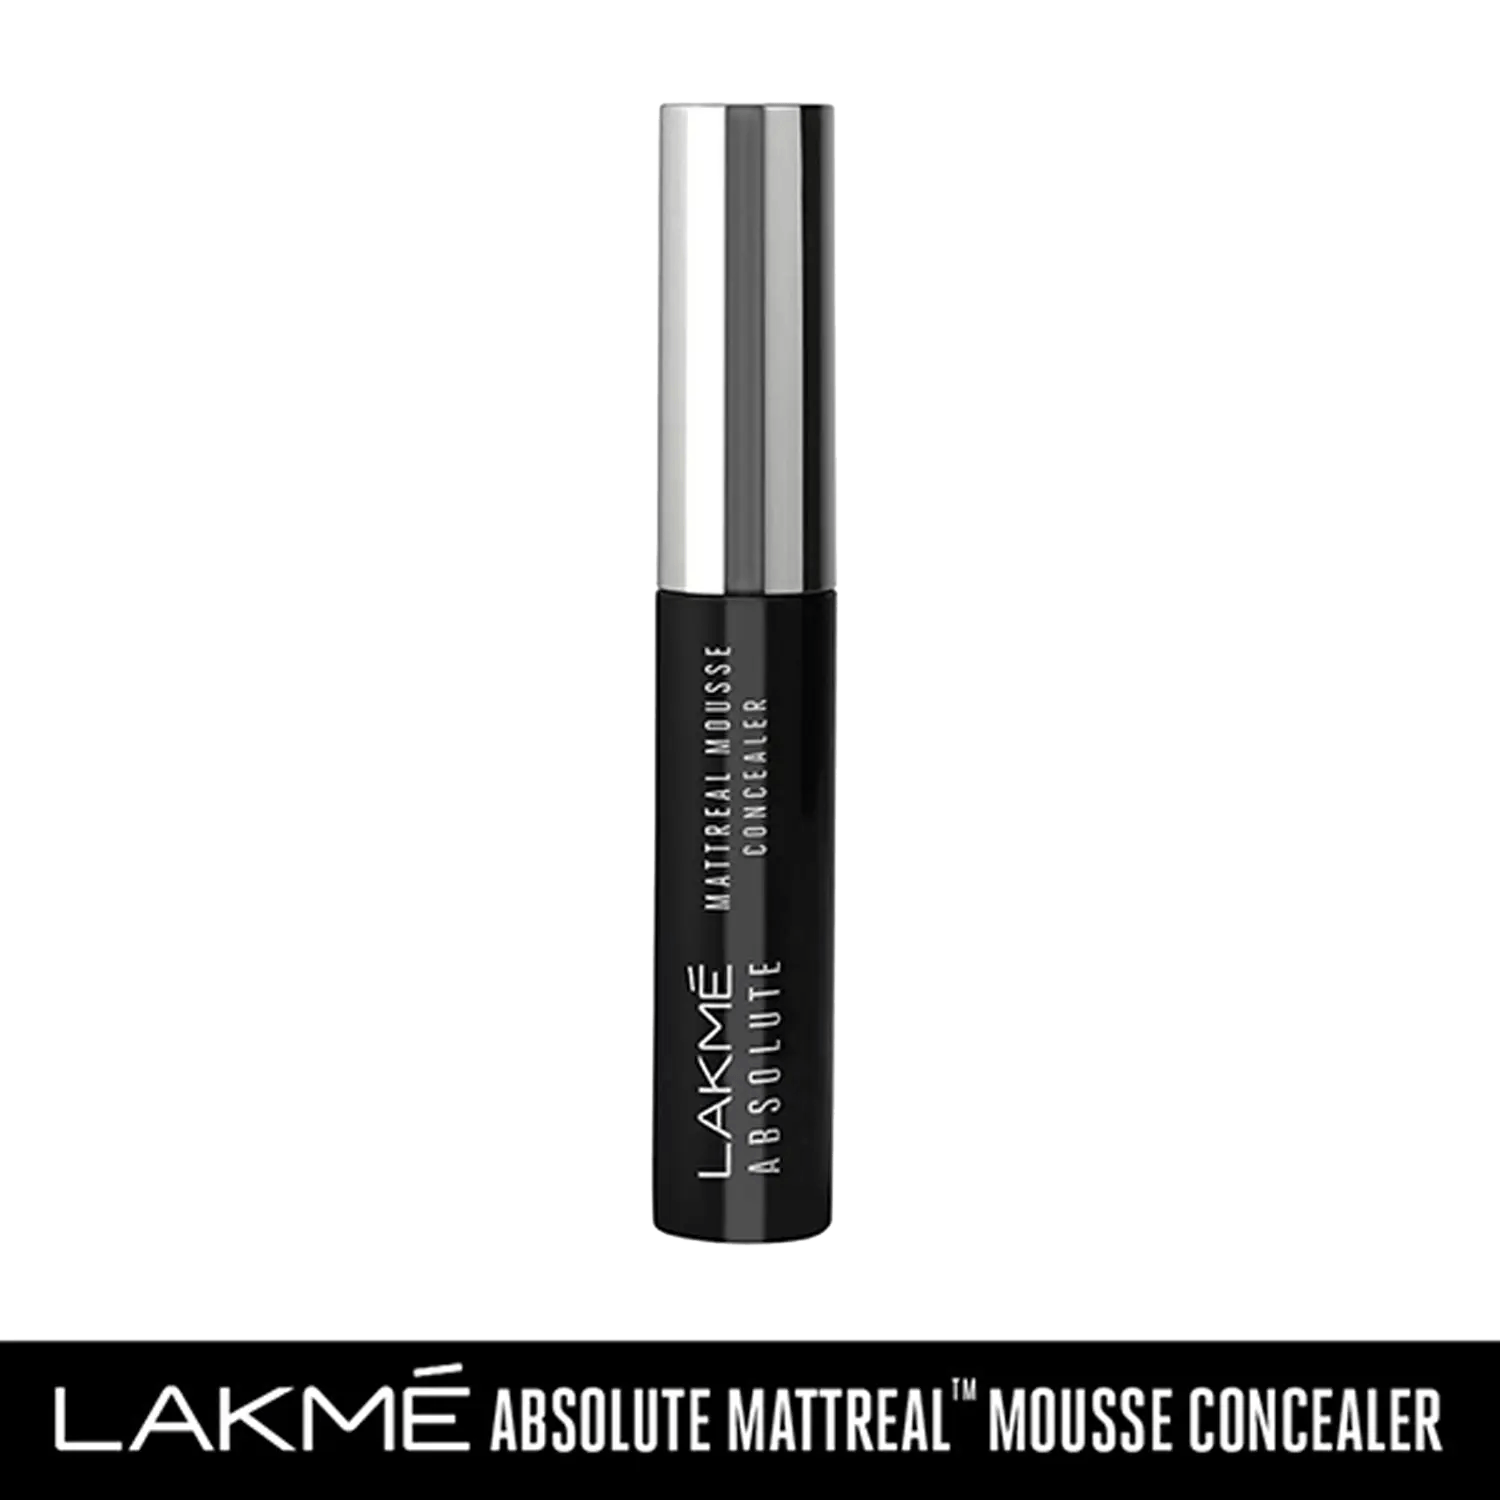 Lakme | Lakme Absolute Mattereal Mousse Concealer - 05 Toffee (9g)